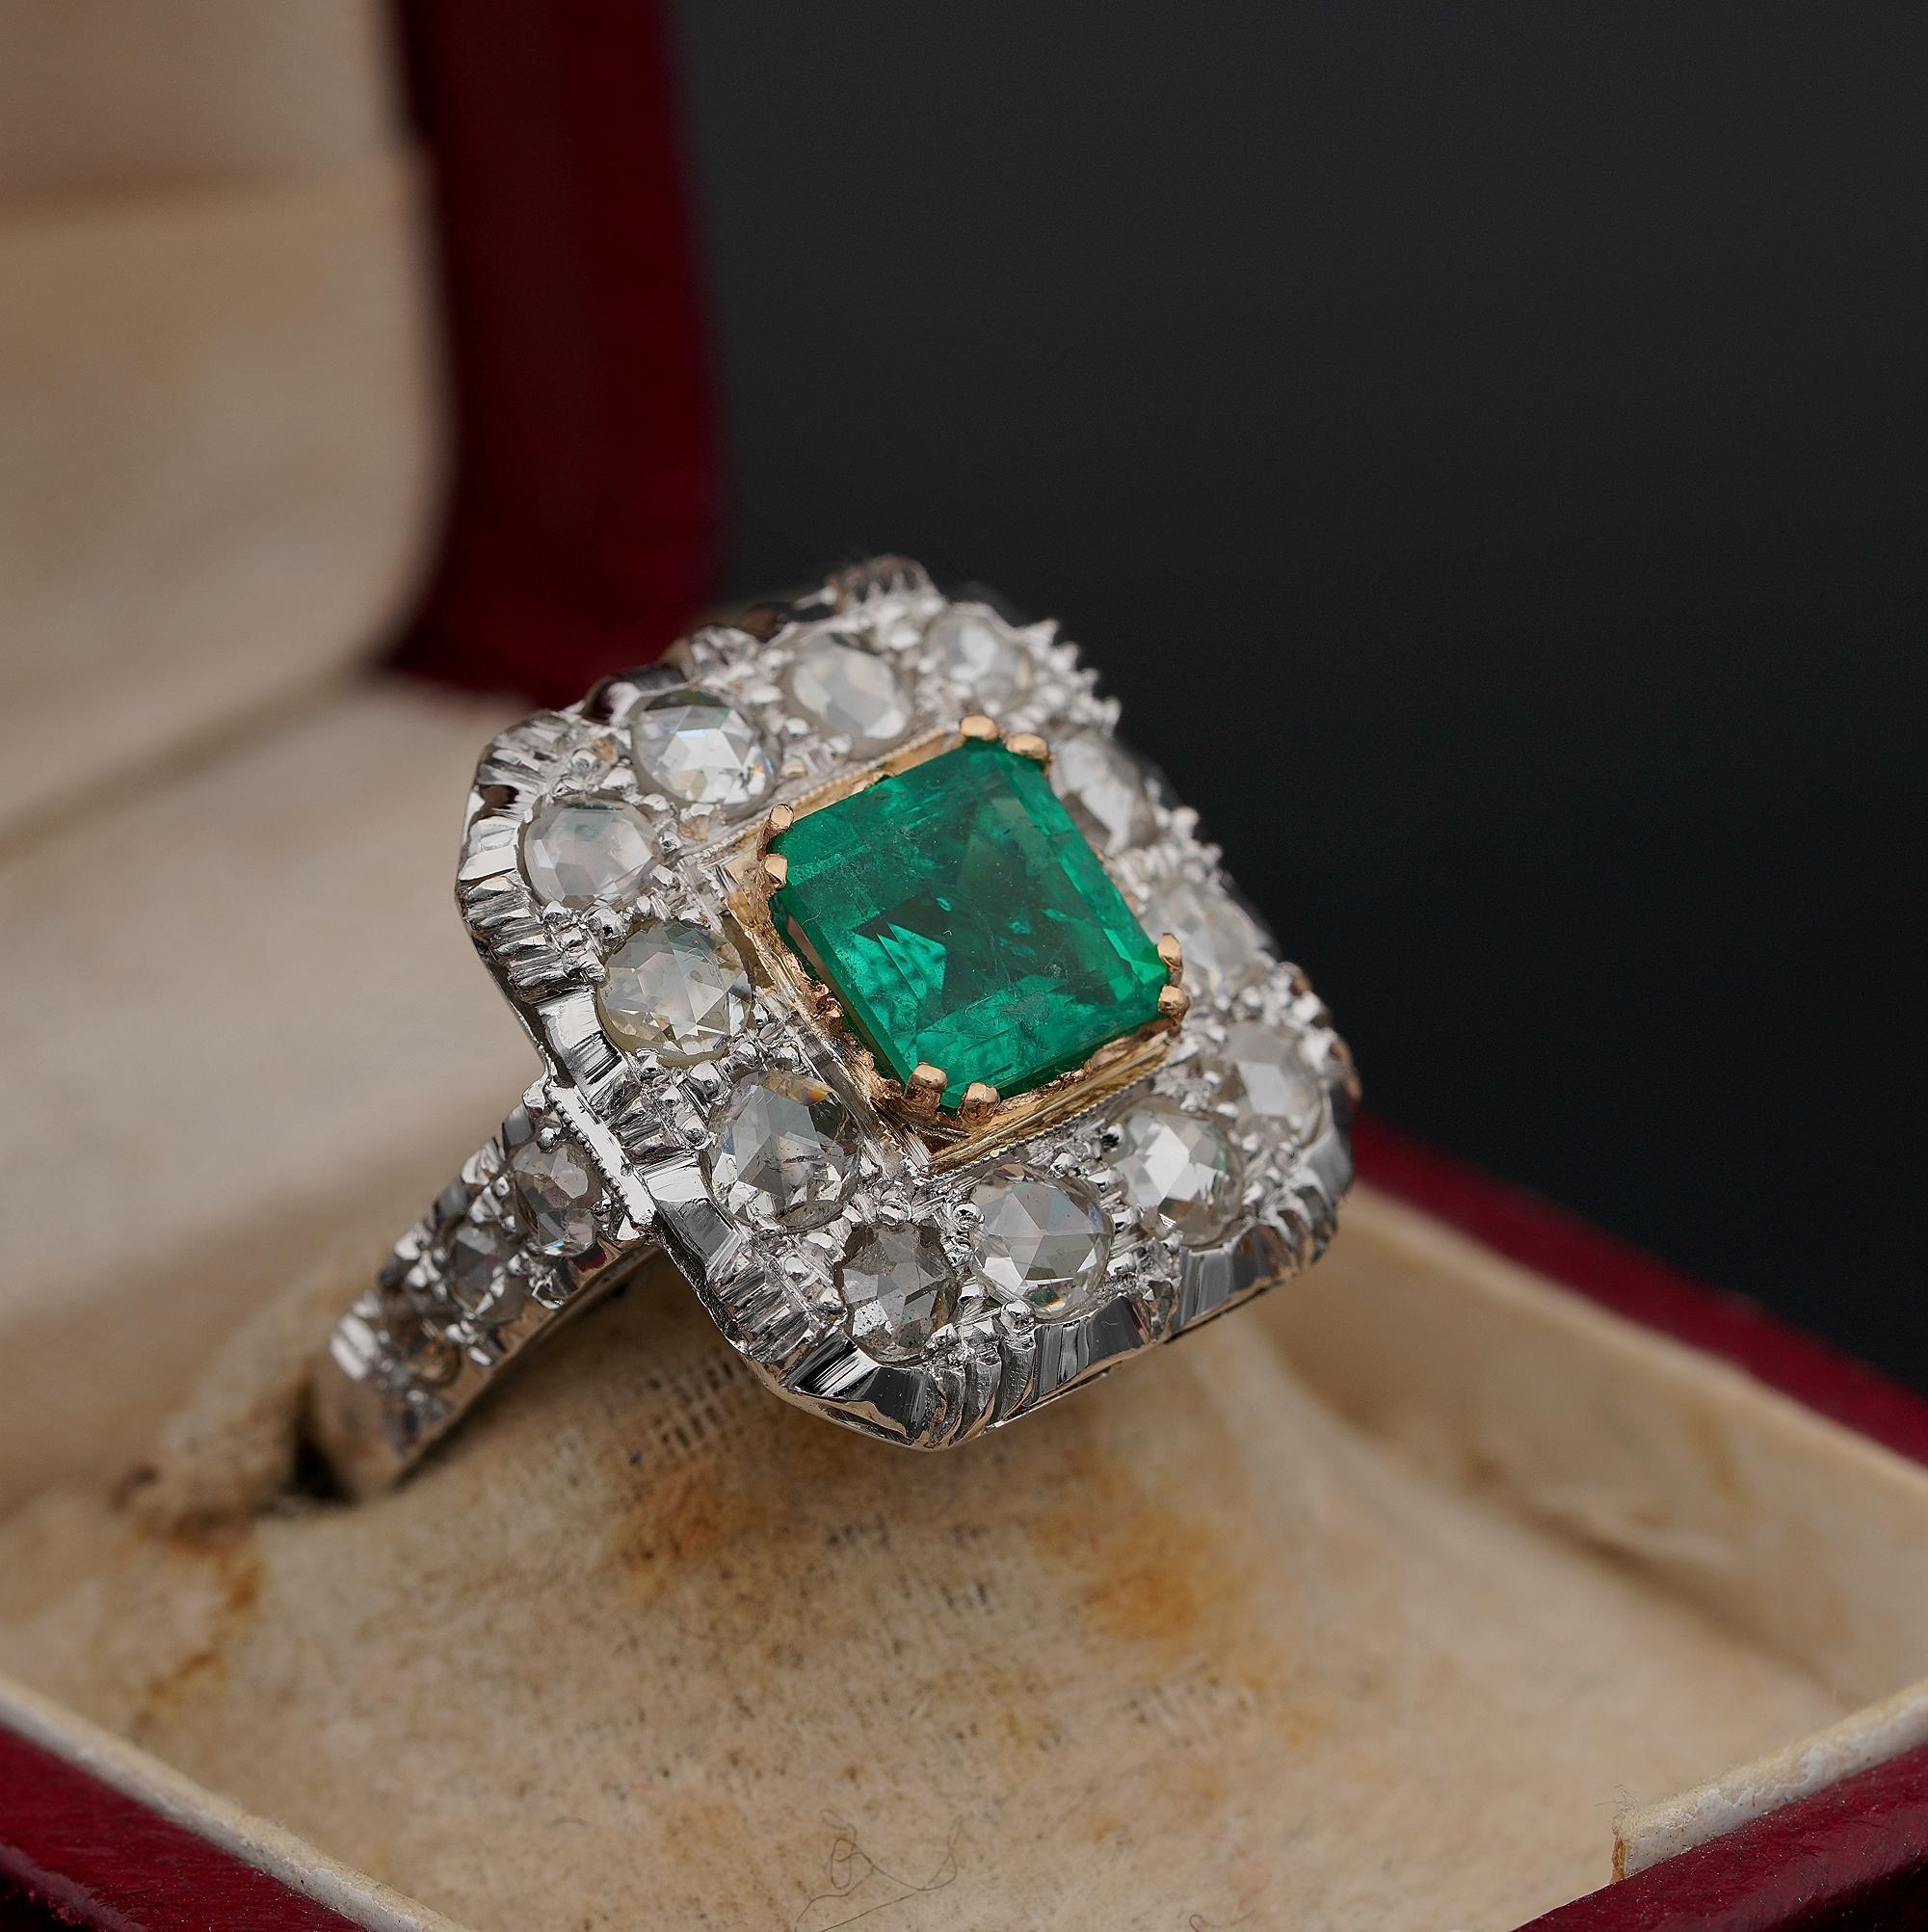 Ever Green
Charmingful early Art Deco Emerald & Diamond ring, unusually set with bright white rose cut Diamonds
Hand crafted of solid 18 KT white gold, tested
1920 ca
Designed with a classy rectangular cluster head with a low profile
Centred by a